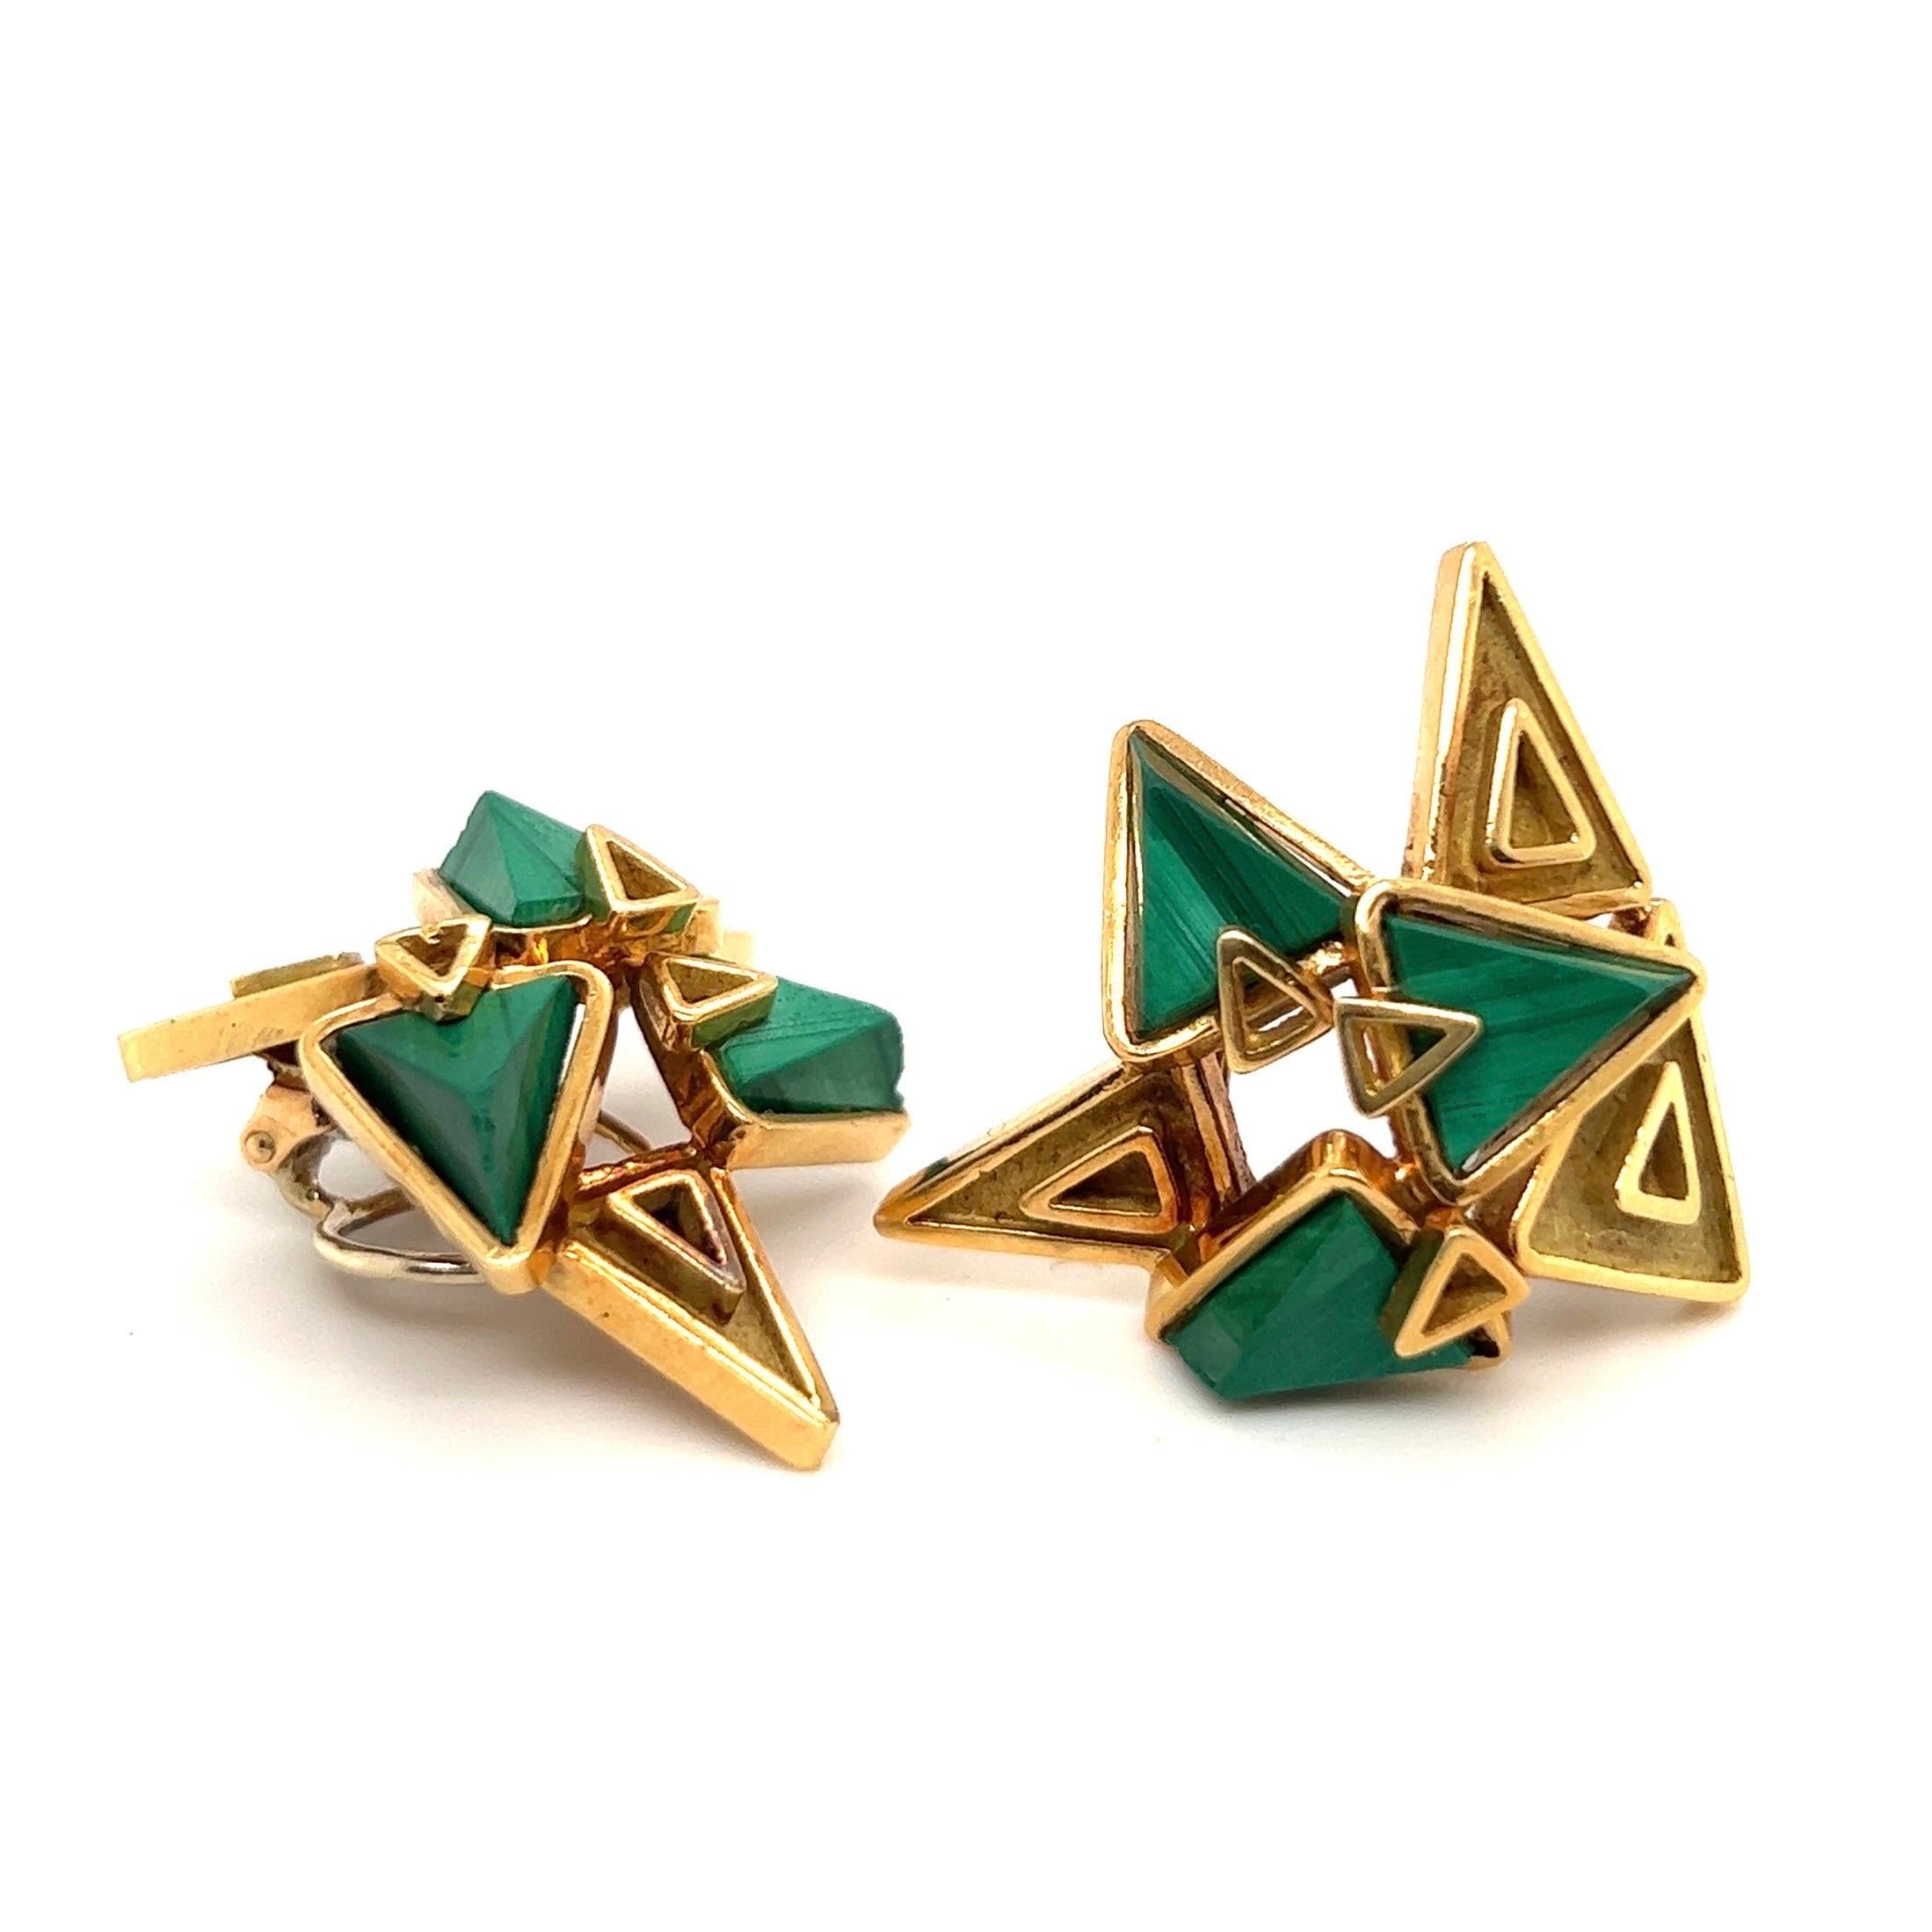 Trillion Cut 18 Karat Yellow Gold and Malachite Earrings by Chaumet, 1970s